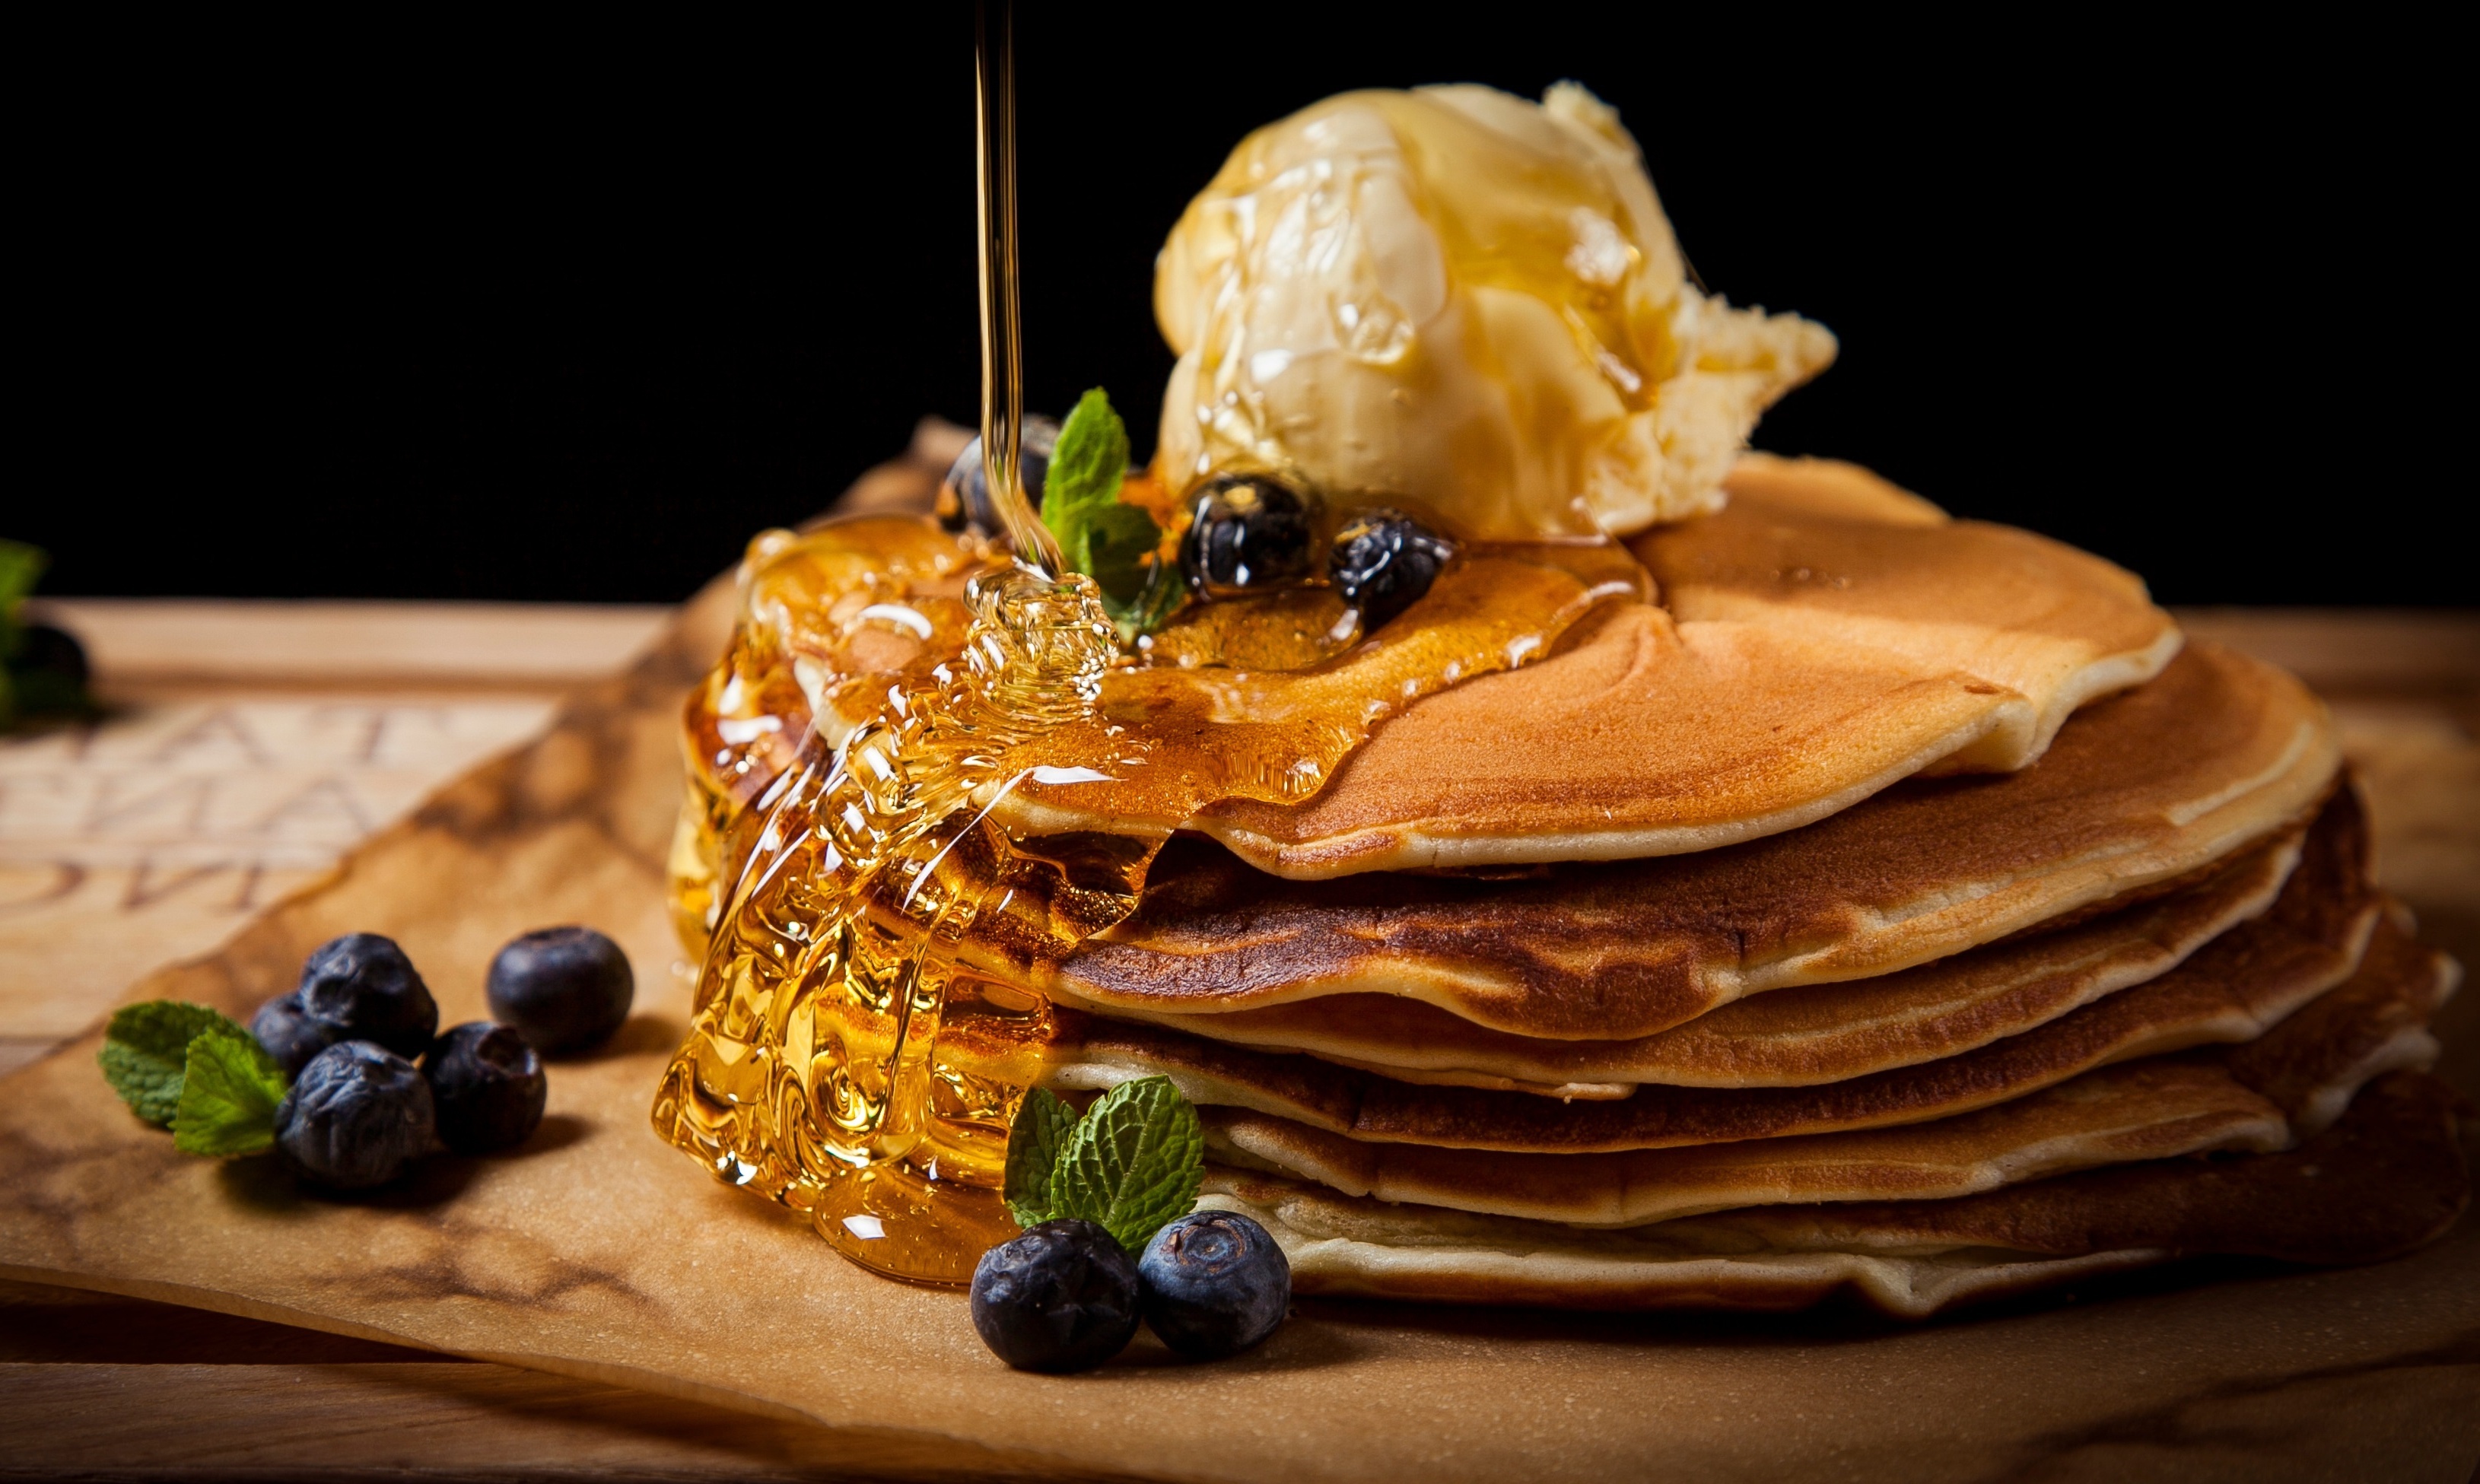 Pancake: Usually served with sweet sauces or toppings such as maple syrup, jam, or sugar. 3260x1960 HD Wallpaper.